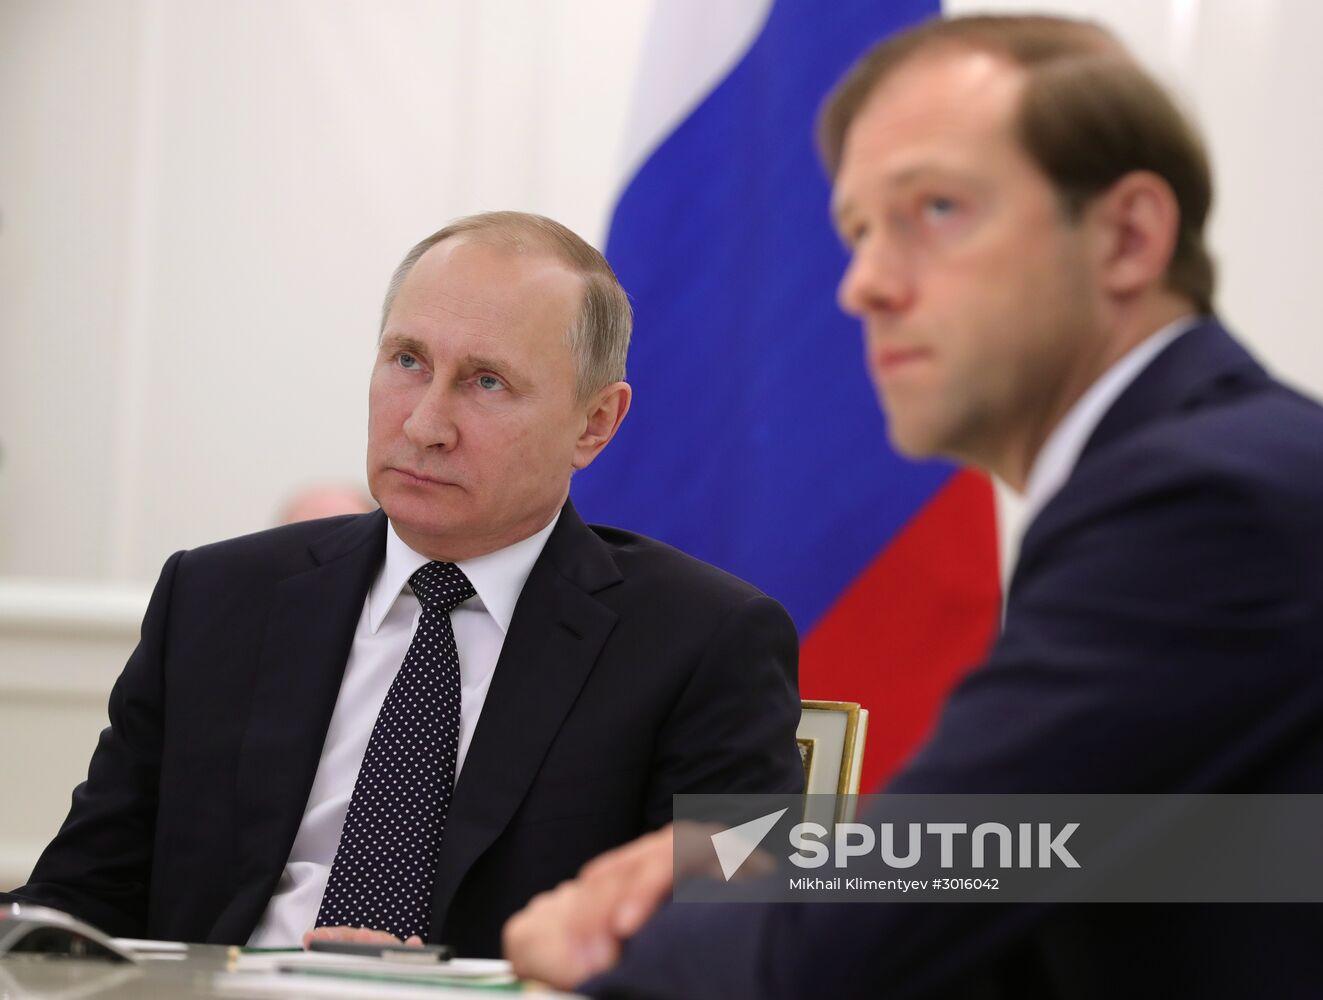 Russian President Vladimir Putin holds video conference with MiG Corporation